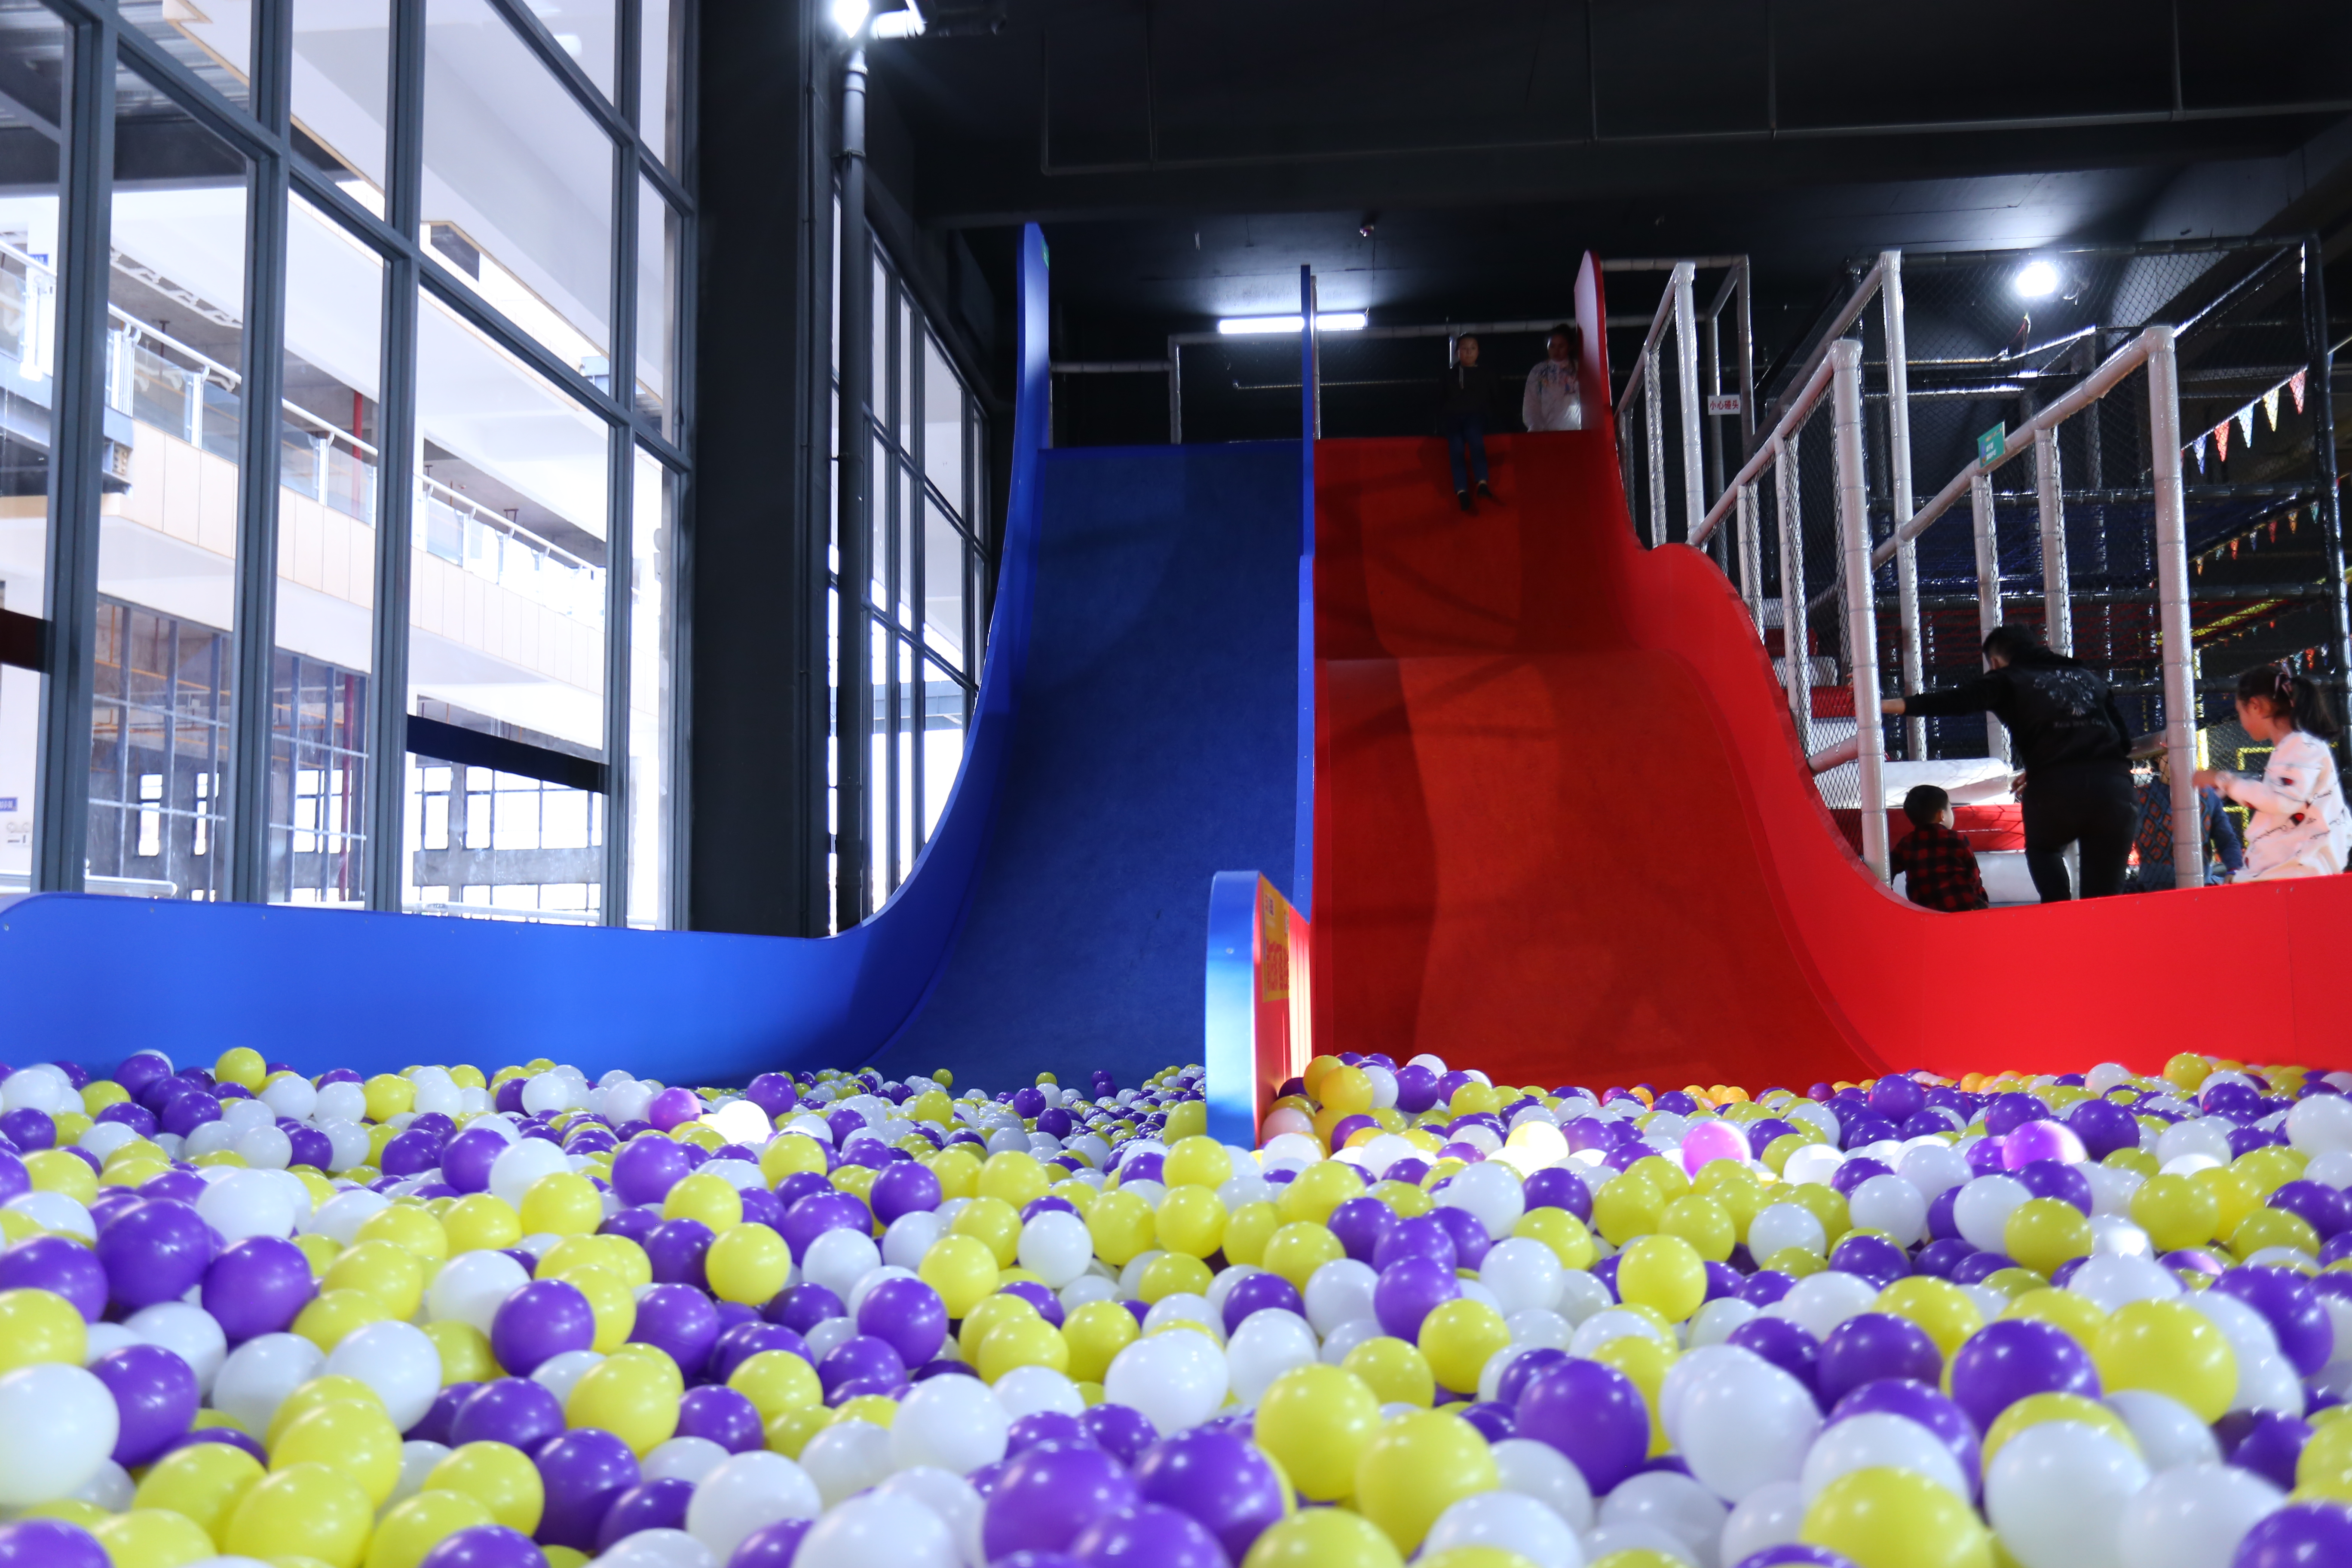 Don’t Make These 4 Mistakes When You Purchase Indoor Playground Equipment!1 (1)